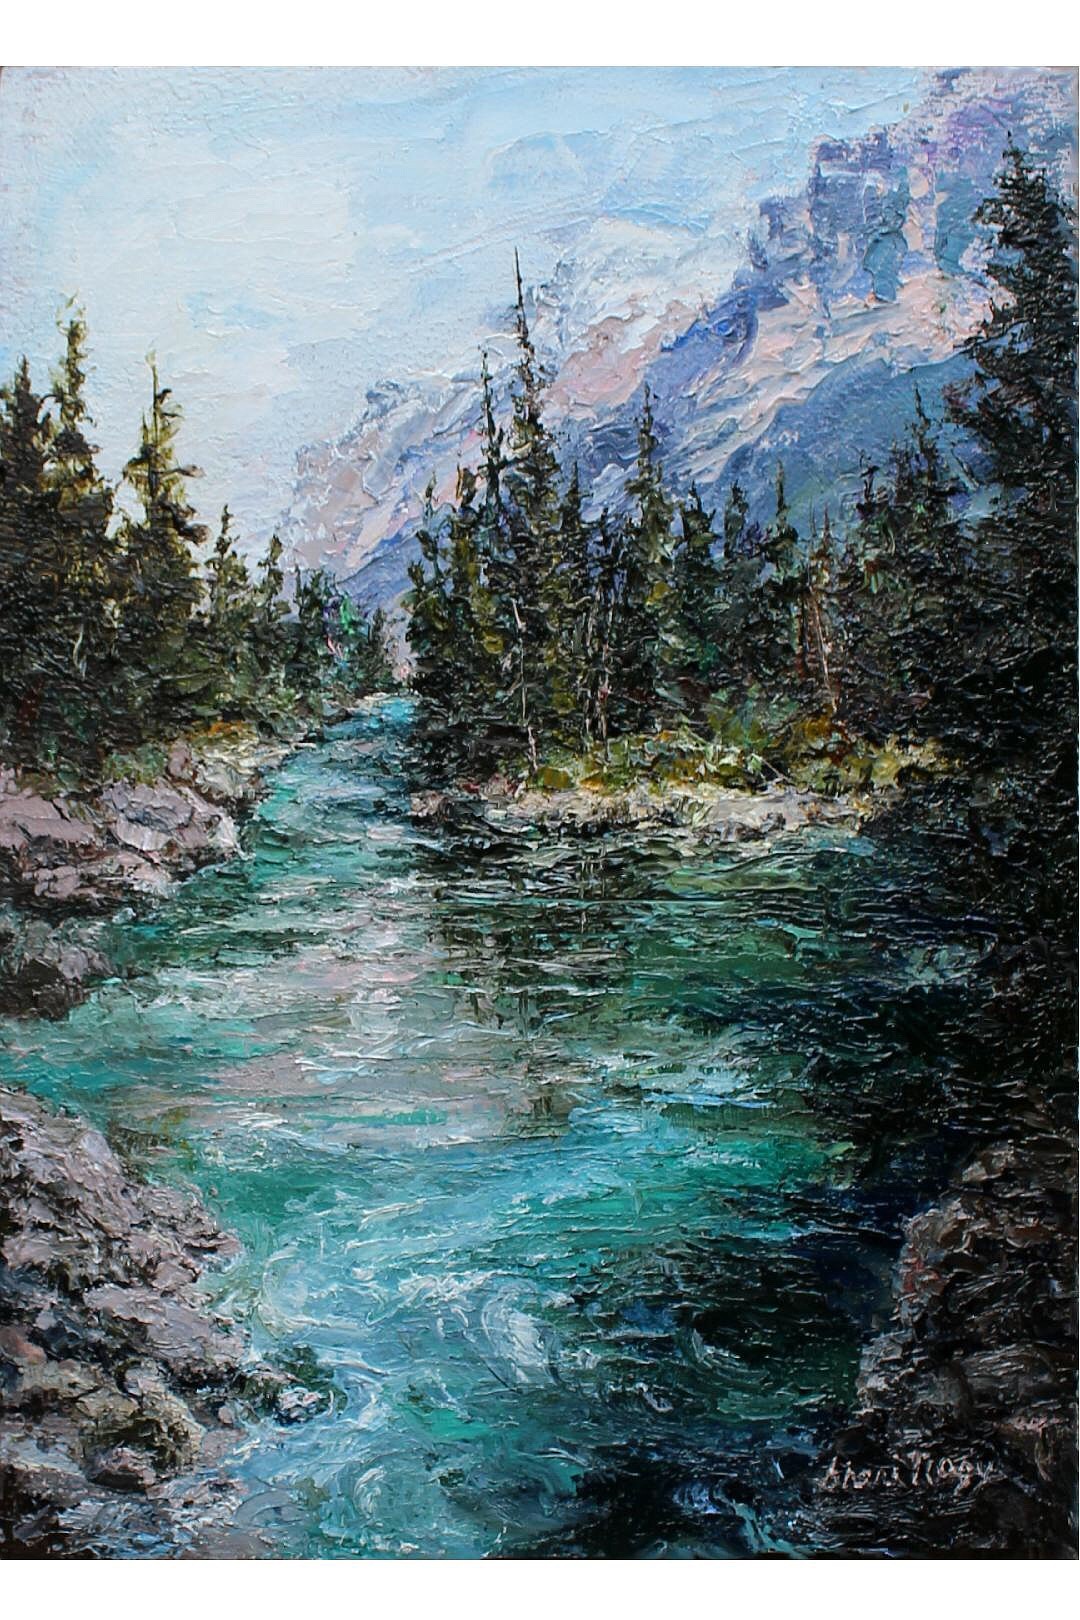 From Above St Mary’s Falls, an oil painting by Sheri Nagy. (Photo provided)